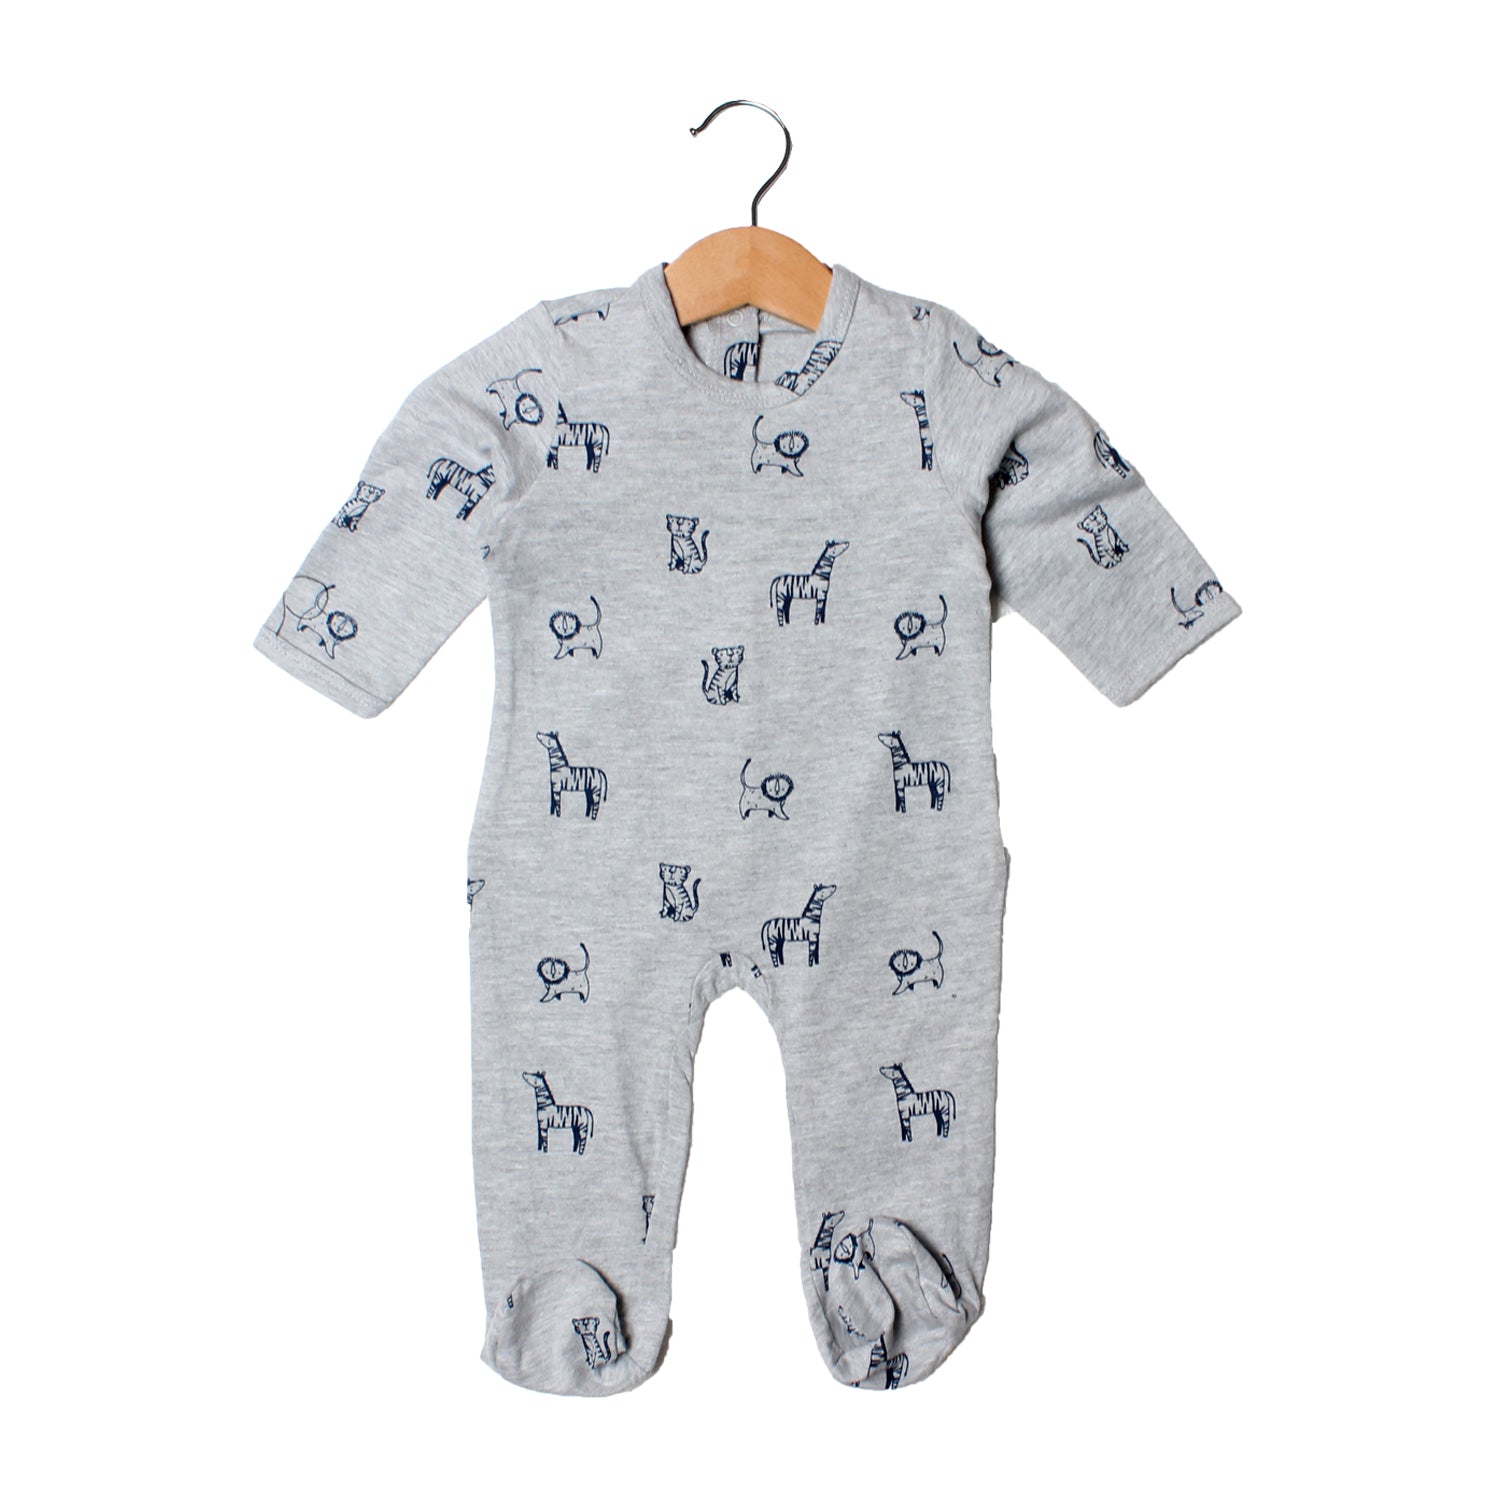 NEW GREY ANIMALS PRINTED FULL BODY FULL SLEEVES ROMPERS